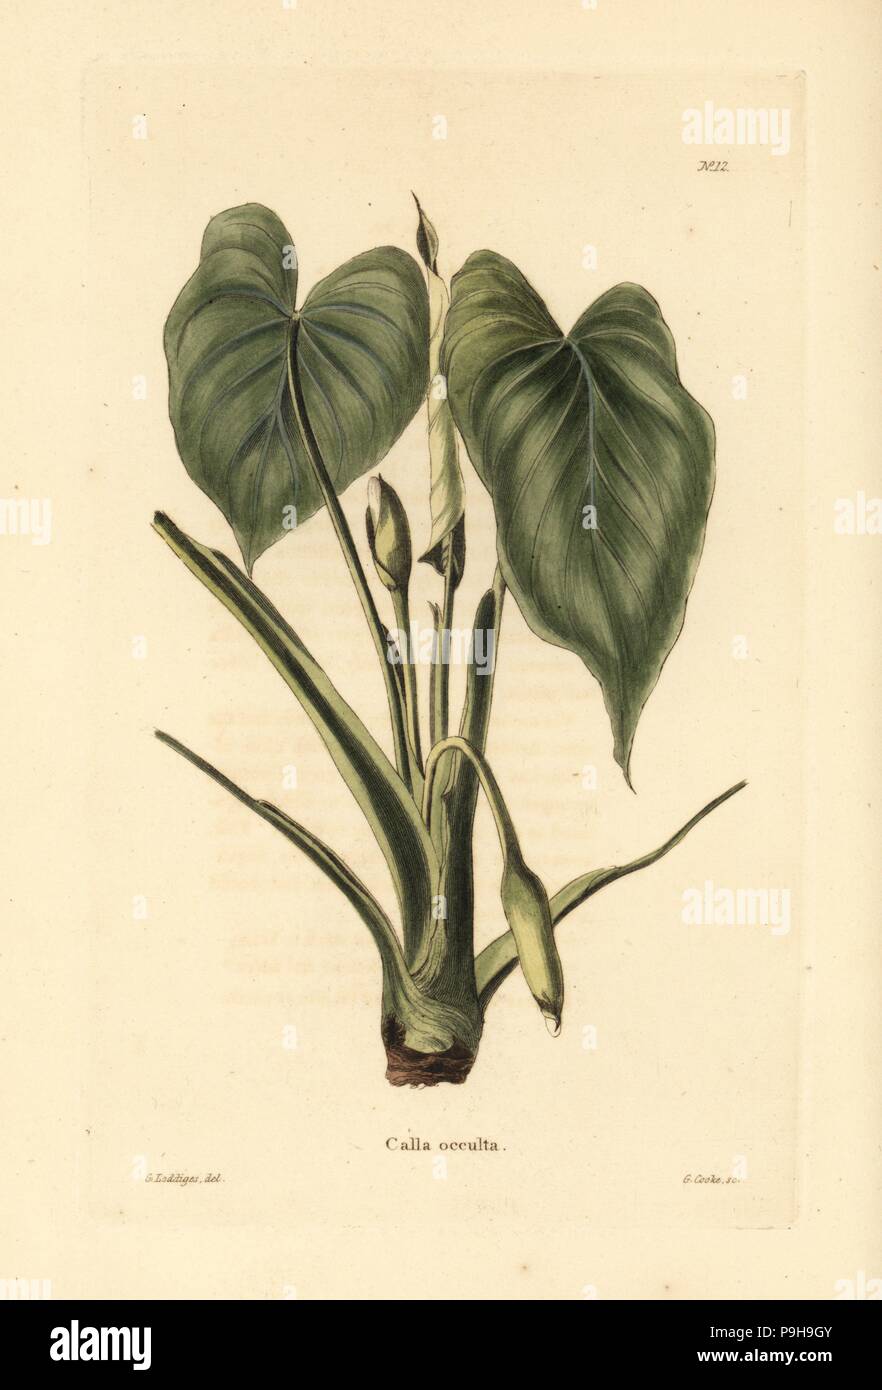 Homalomena occulta (Calla occulta). Handcoloured copperplate engraving by George Cooke after George Loddiges from Conrad Loddiges' Botanical Cabinet, Hackney, 1817. Stock Photo